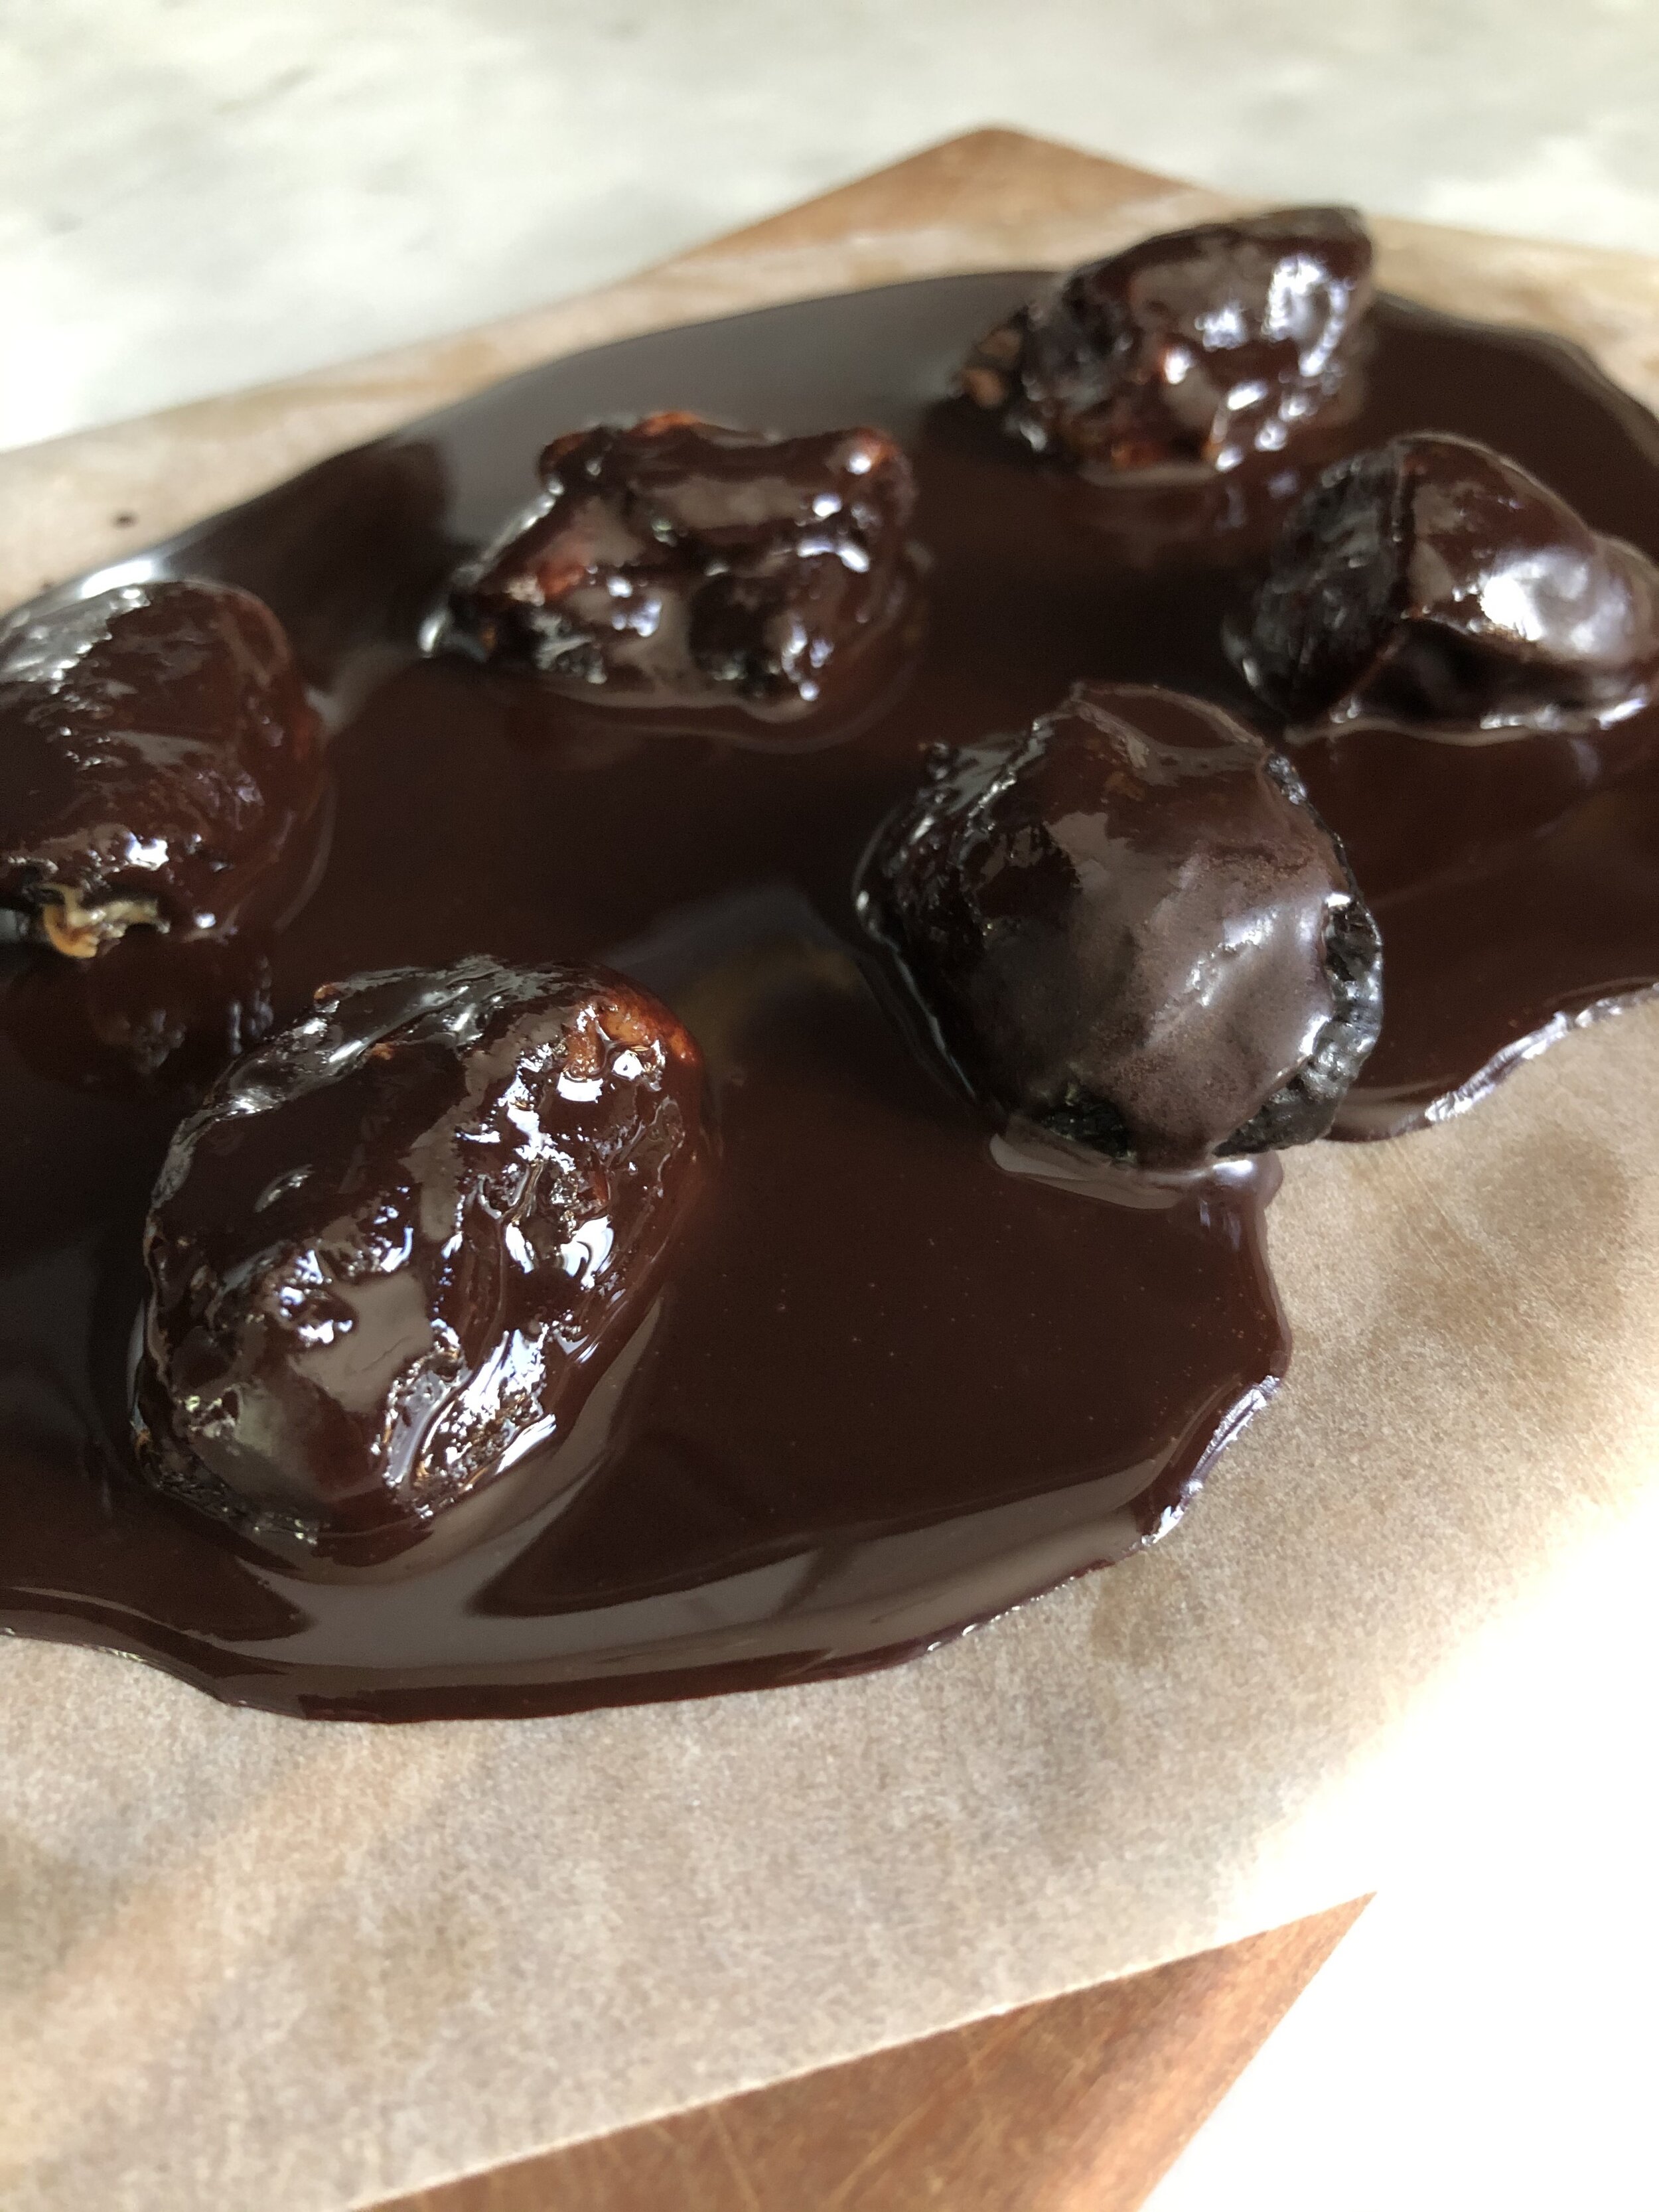 Lactation Chocolate Covered Stuffed Plums — Held